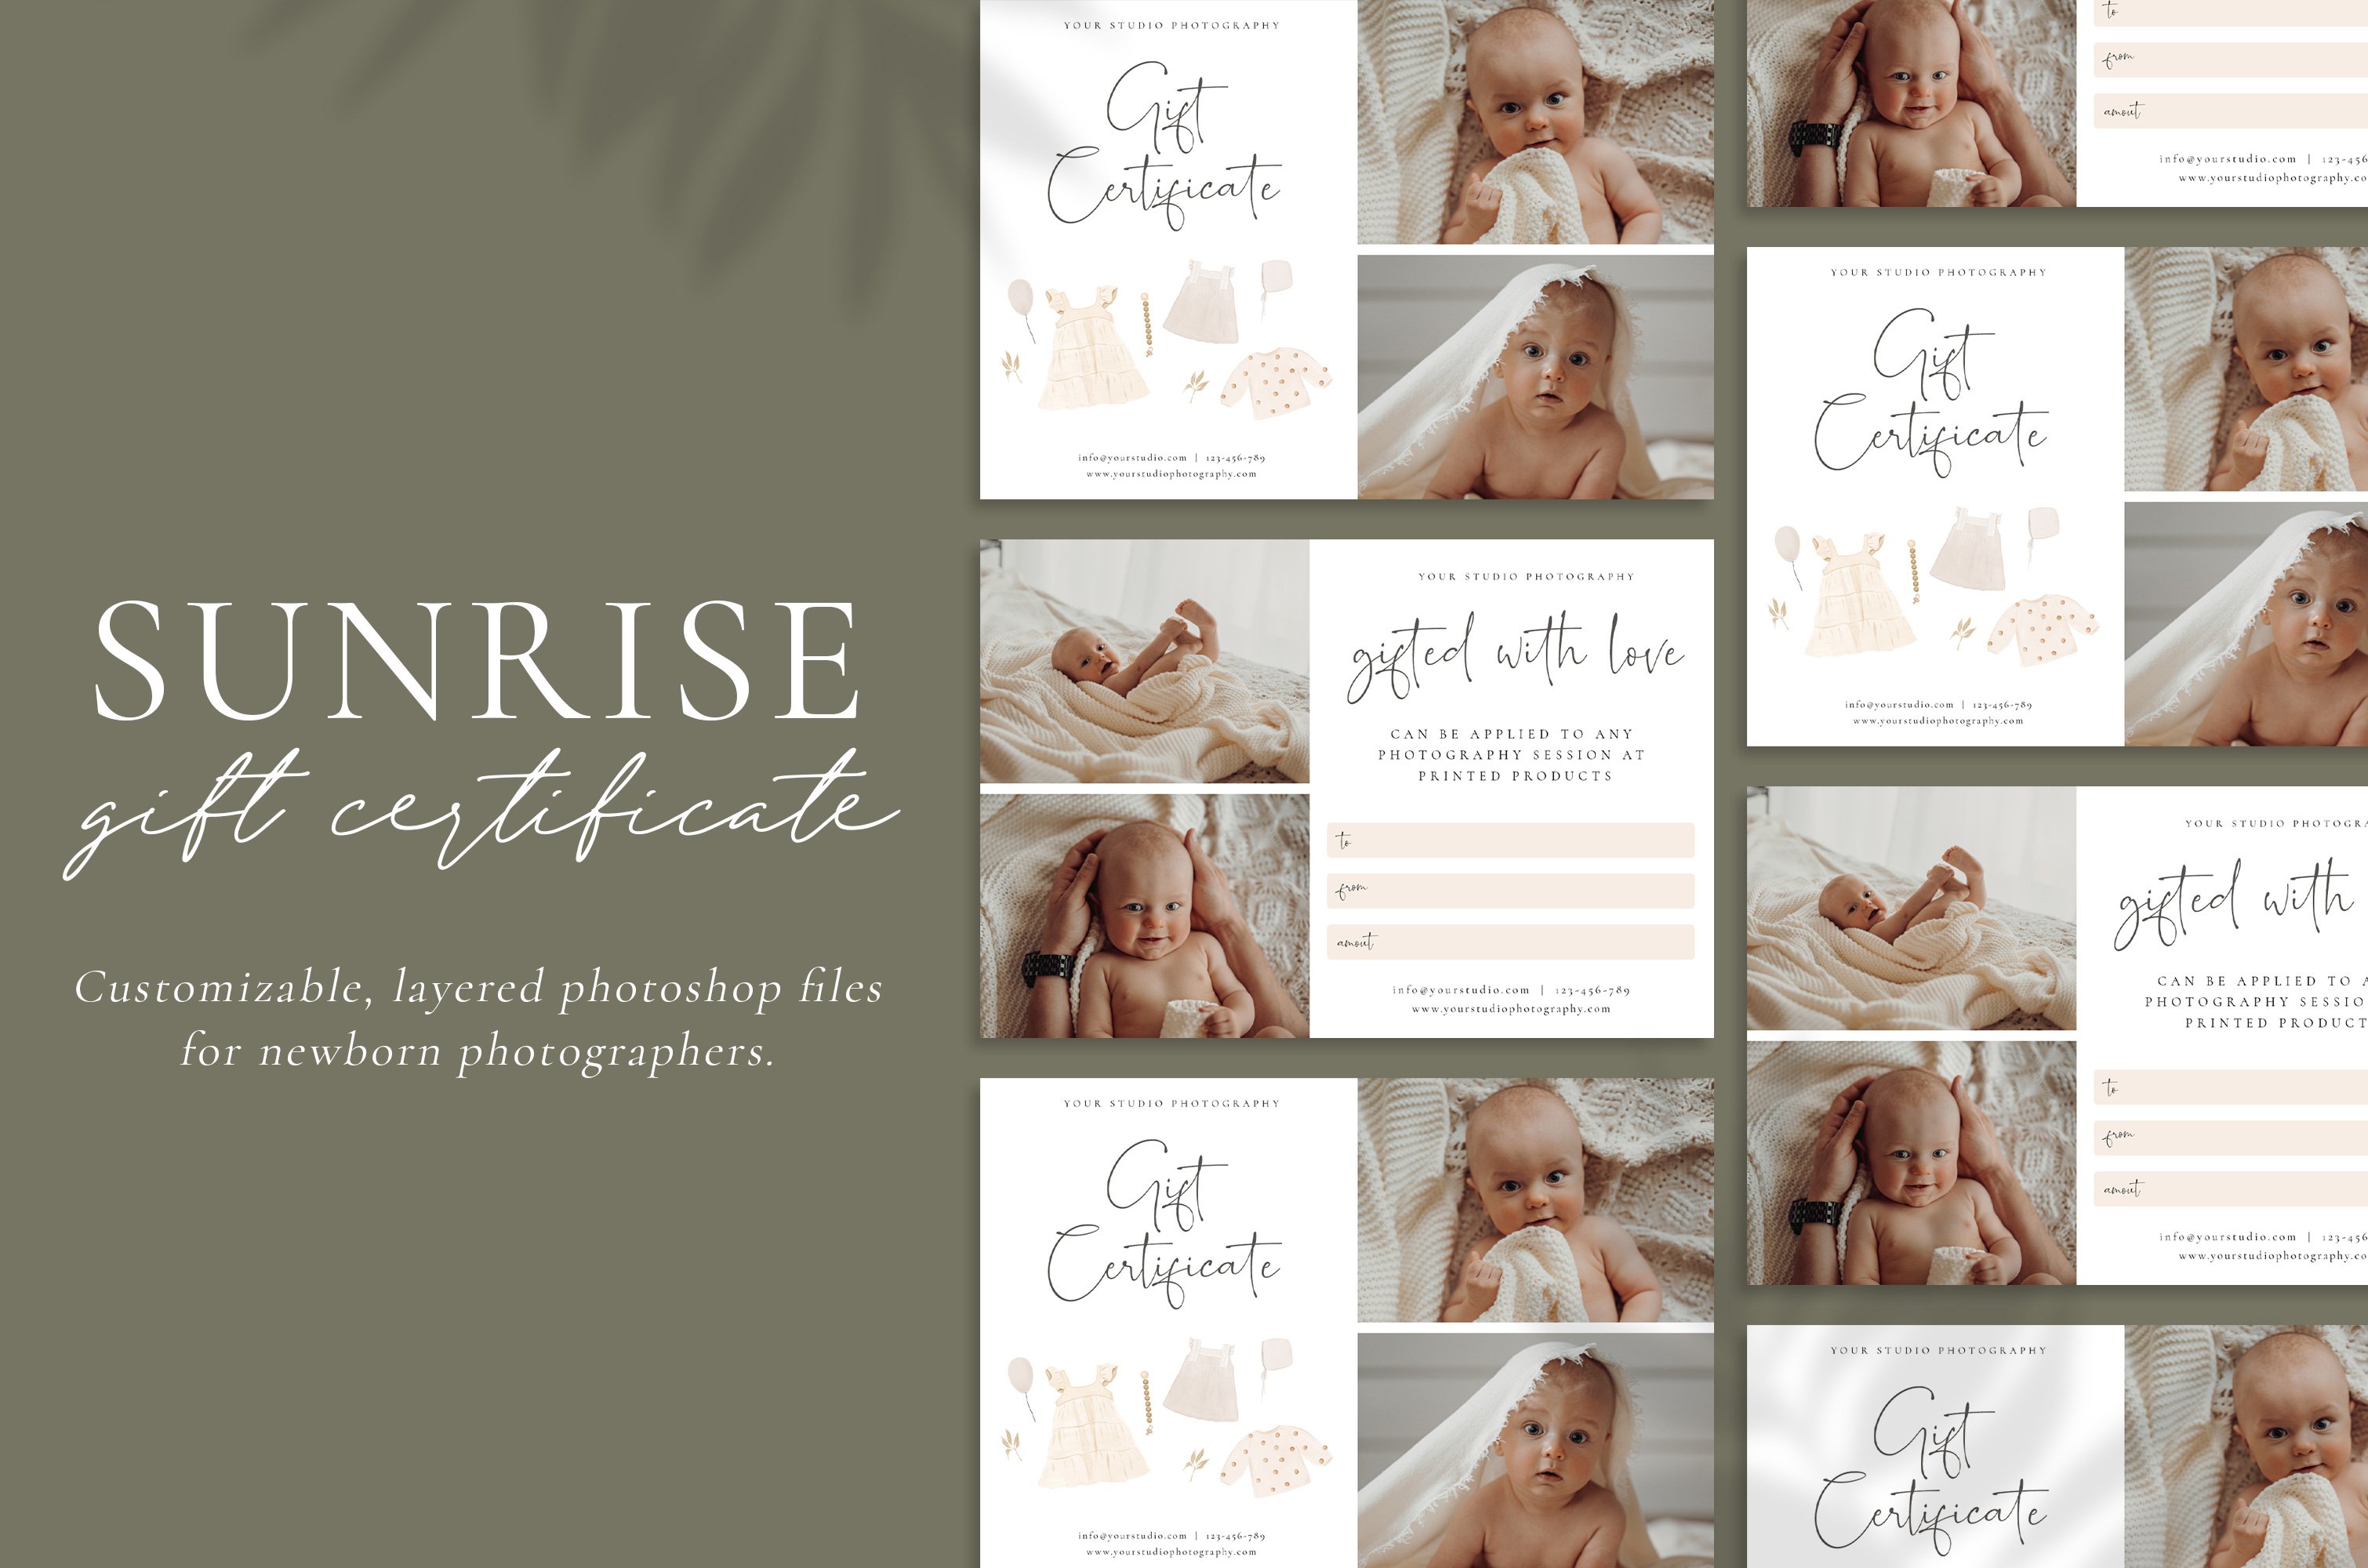 Photographer Gift Certificates cover image.